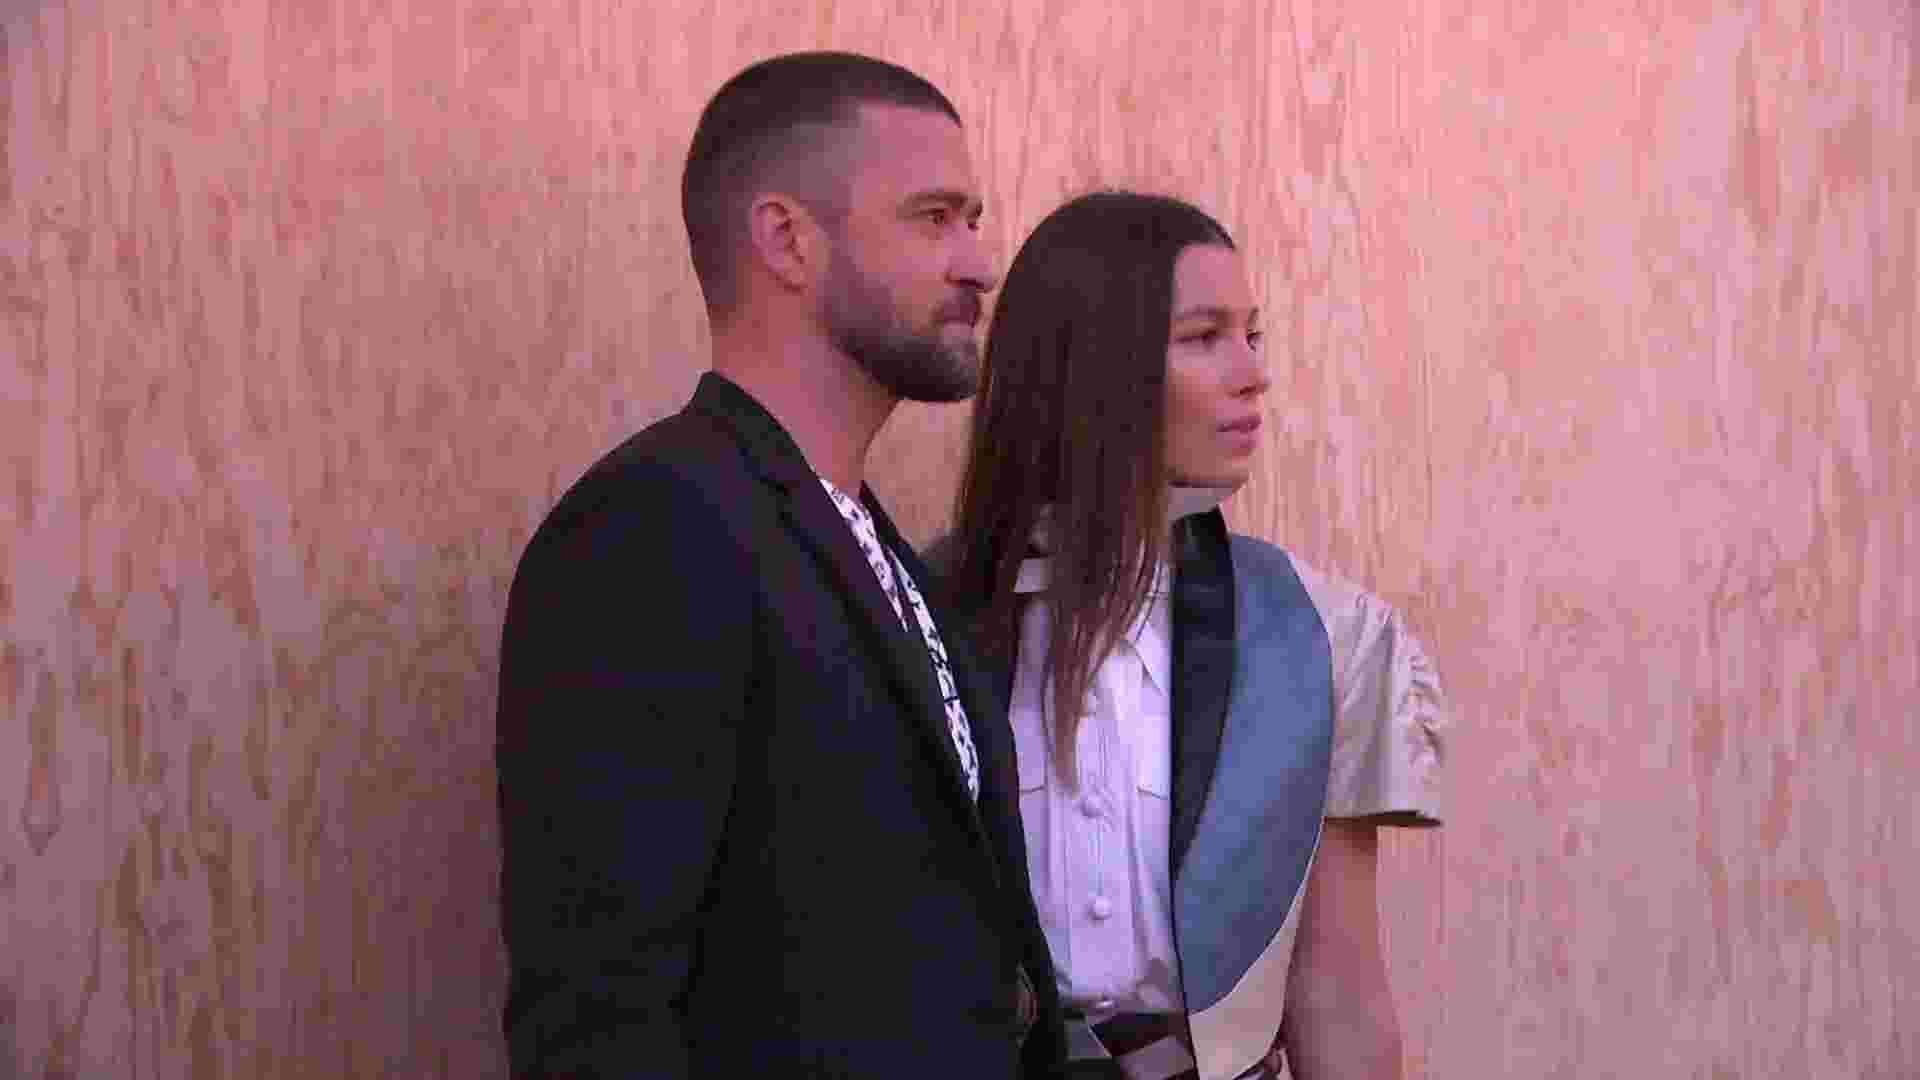 Justin Timberlake and Jessica Biel are couple goals as they pose in wild  looks 👀at the Louis Vuitton men's runway show in Paris🕶💫